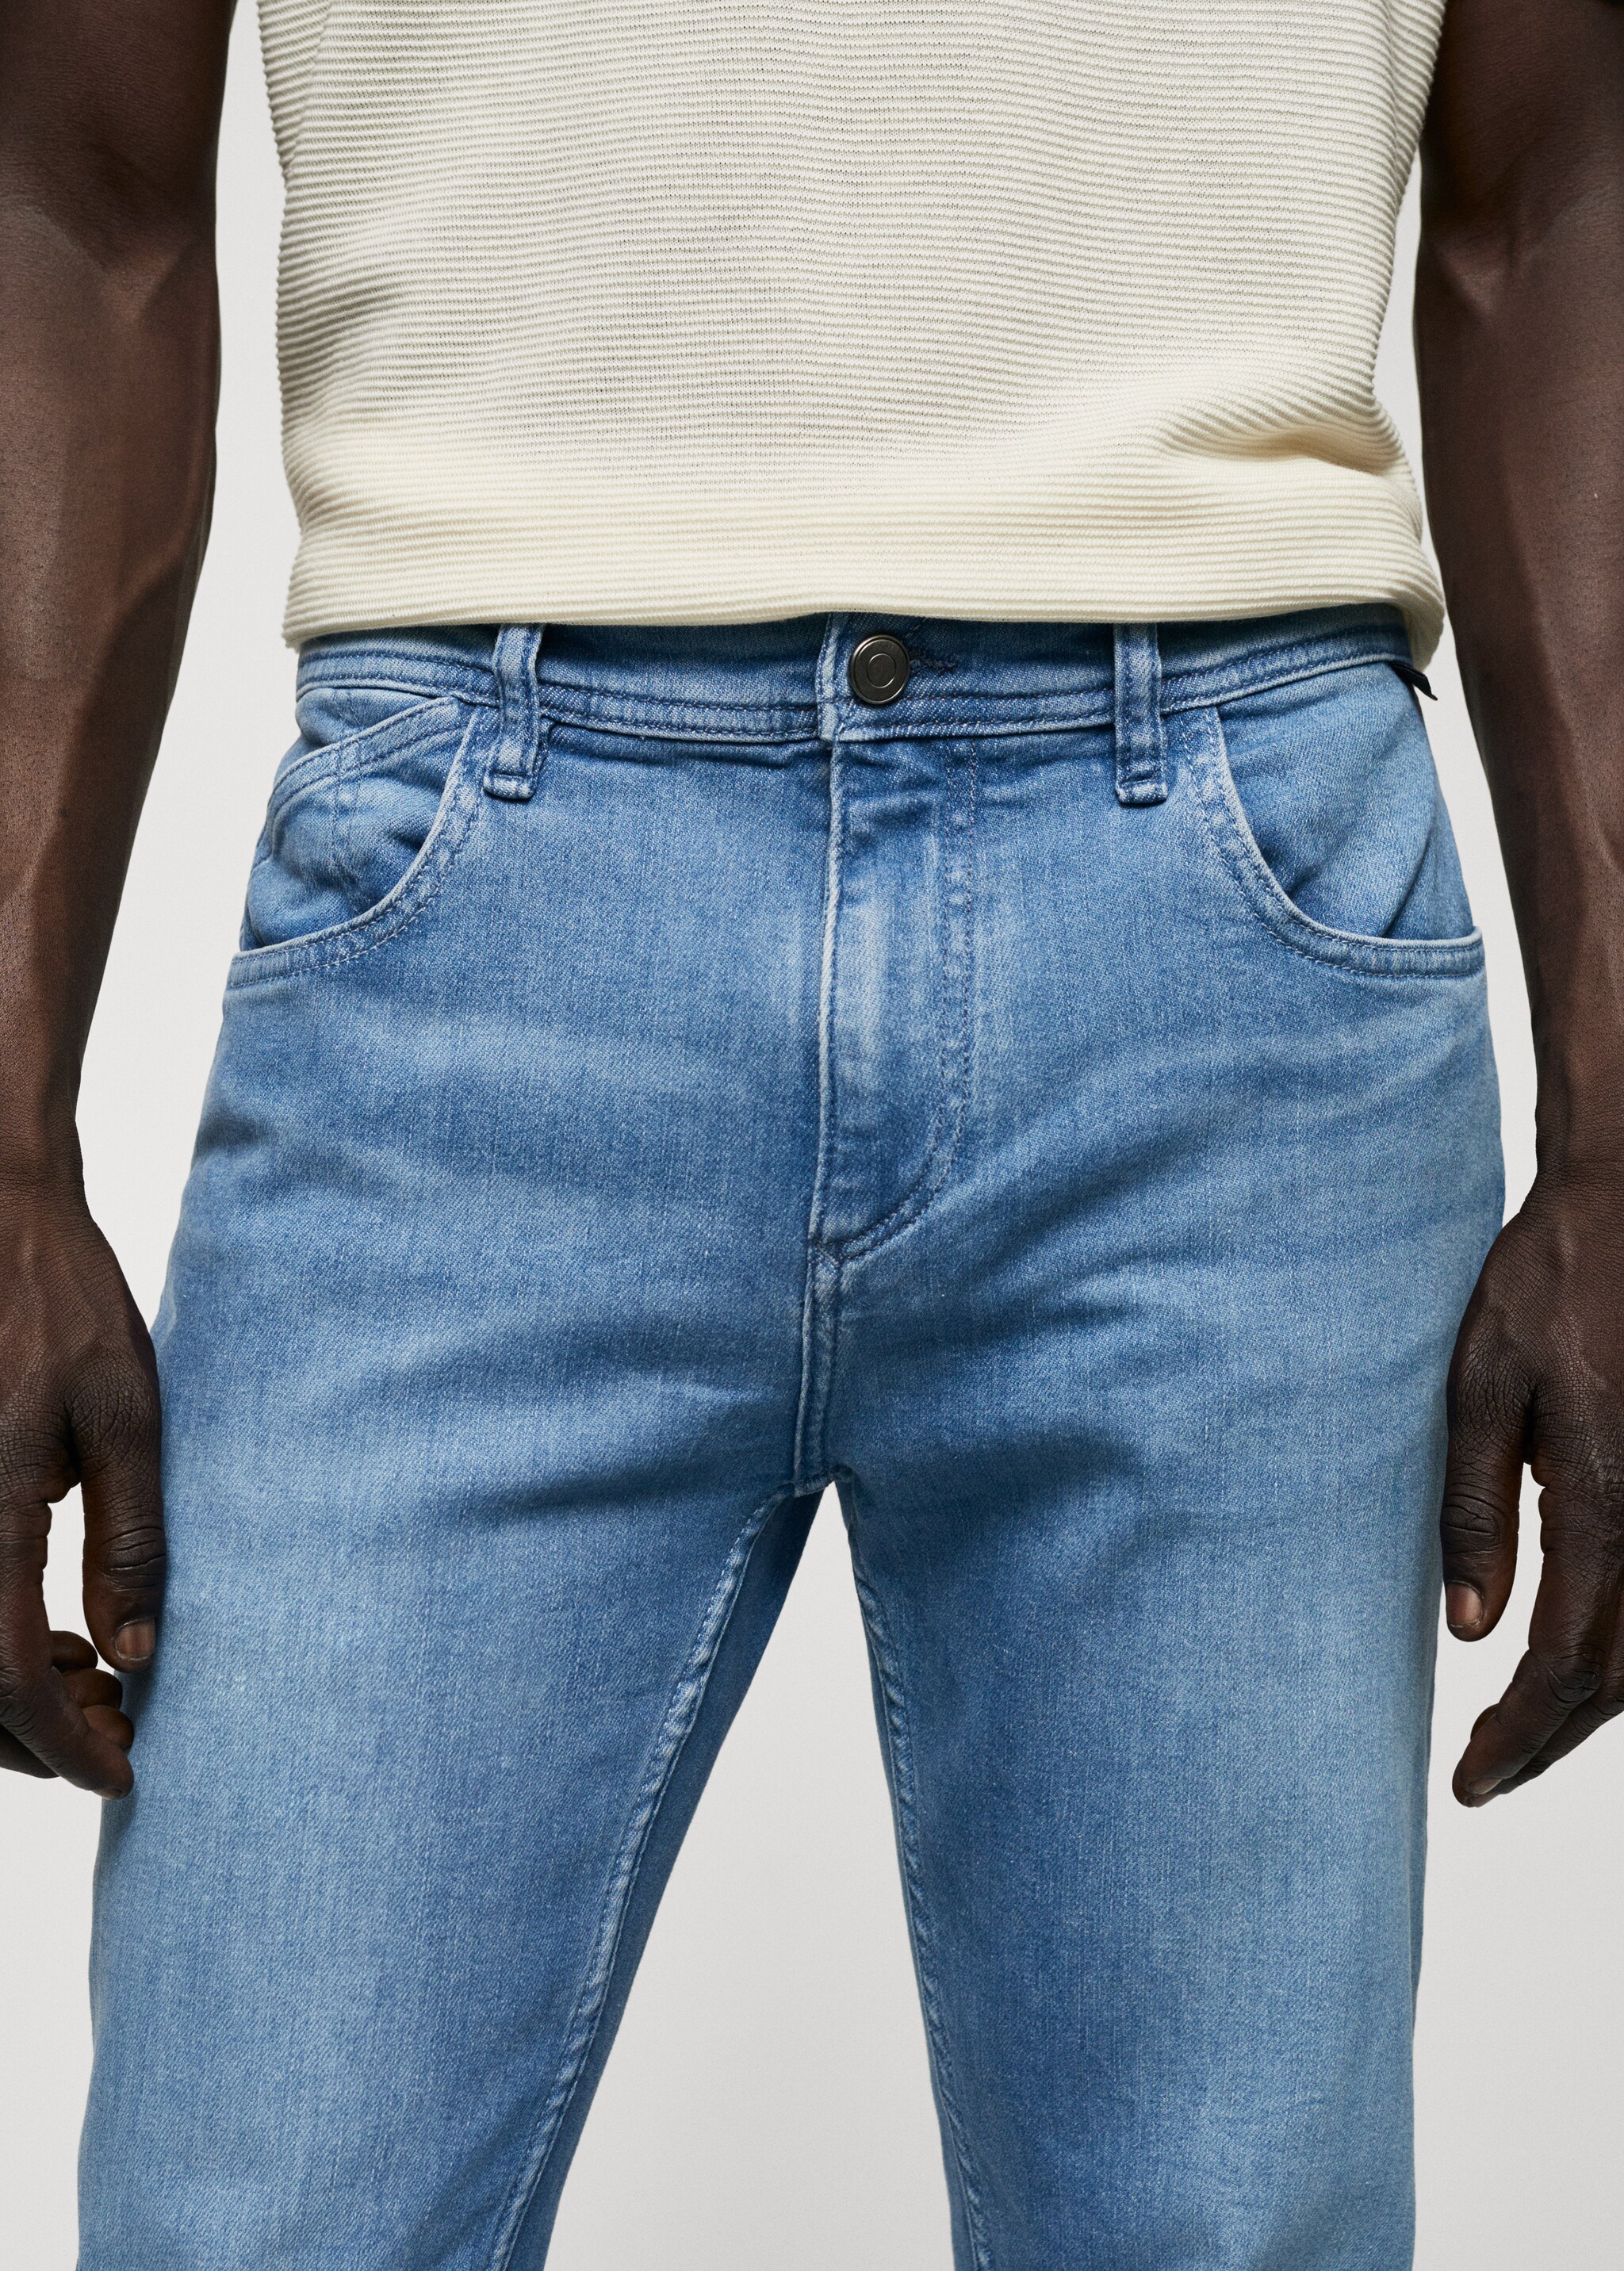 Premium skinny jeans - Details of the article 1